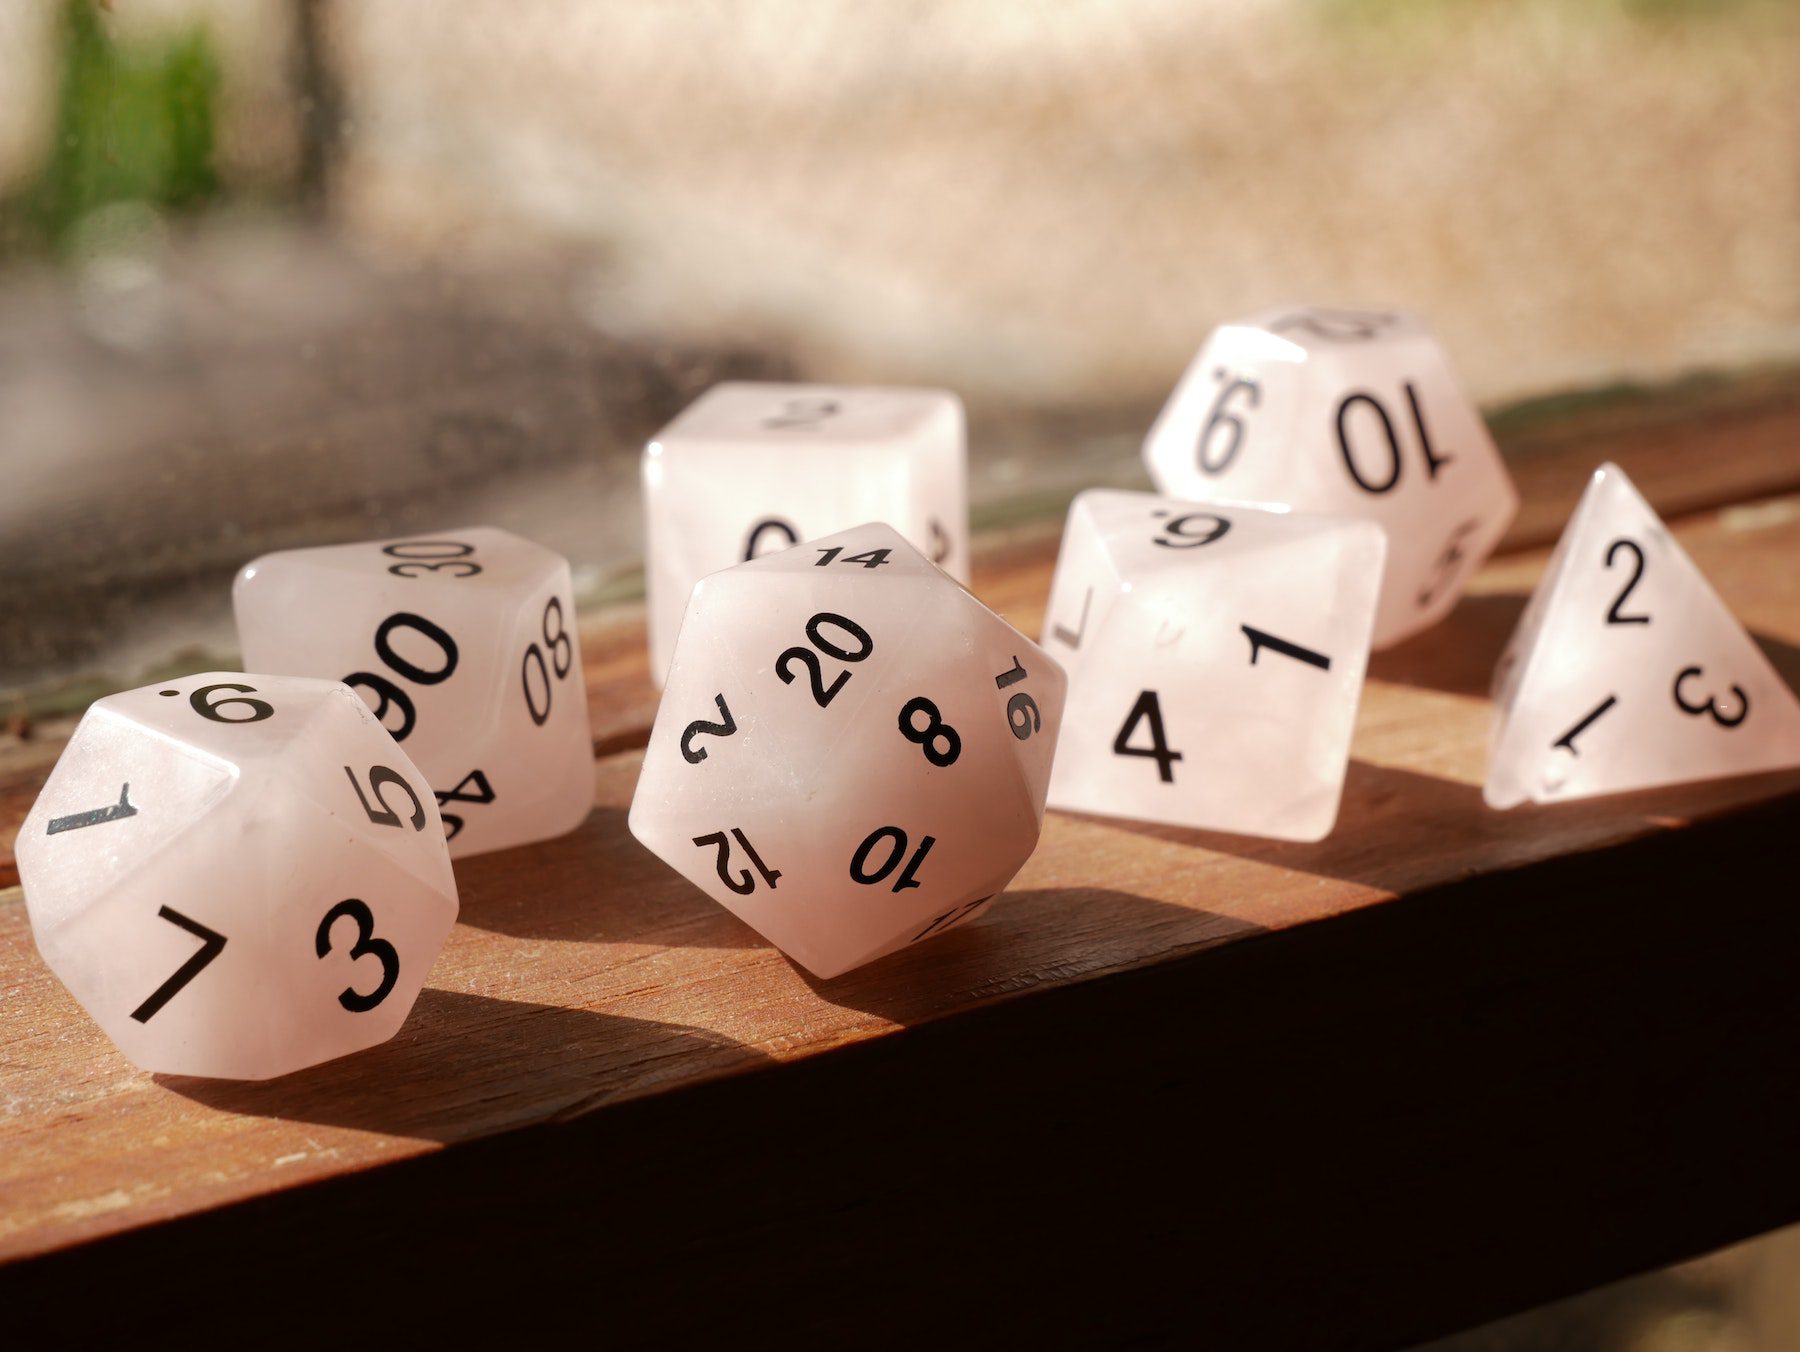 White various dice such as D20, D12, D10, and a normal 6-sided dice are laid in a sunlit window sill